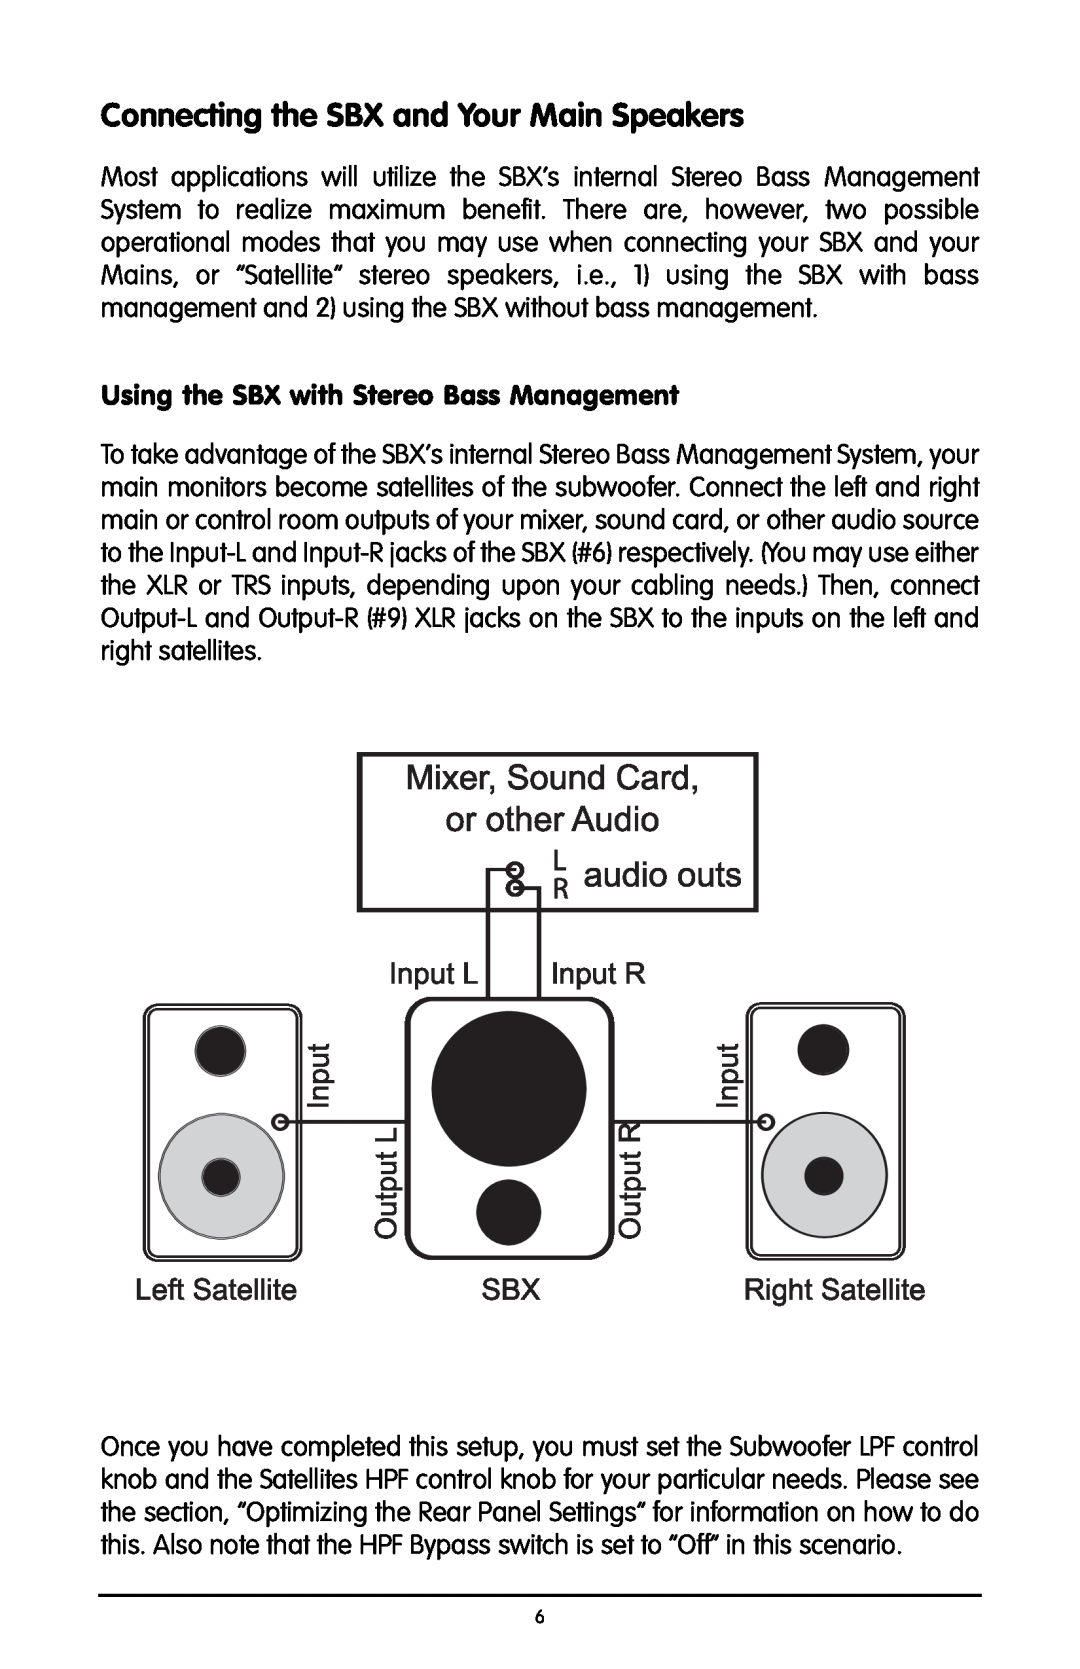 M-Audio user manual C nnecting the SBX and Your Main Speakers 